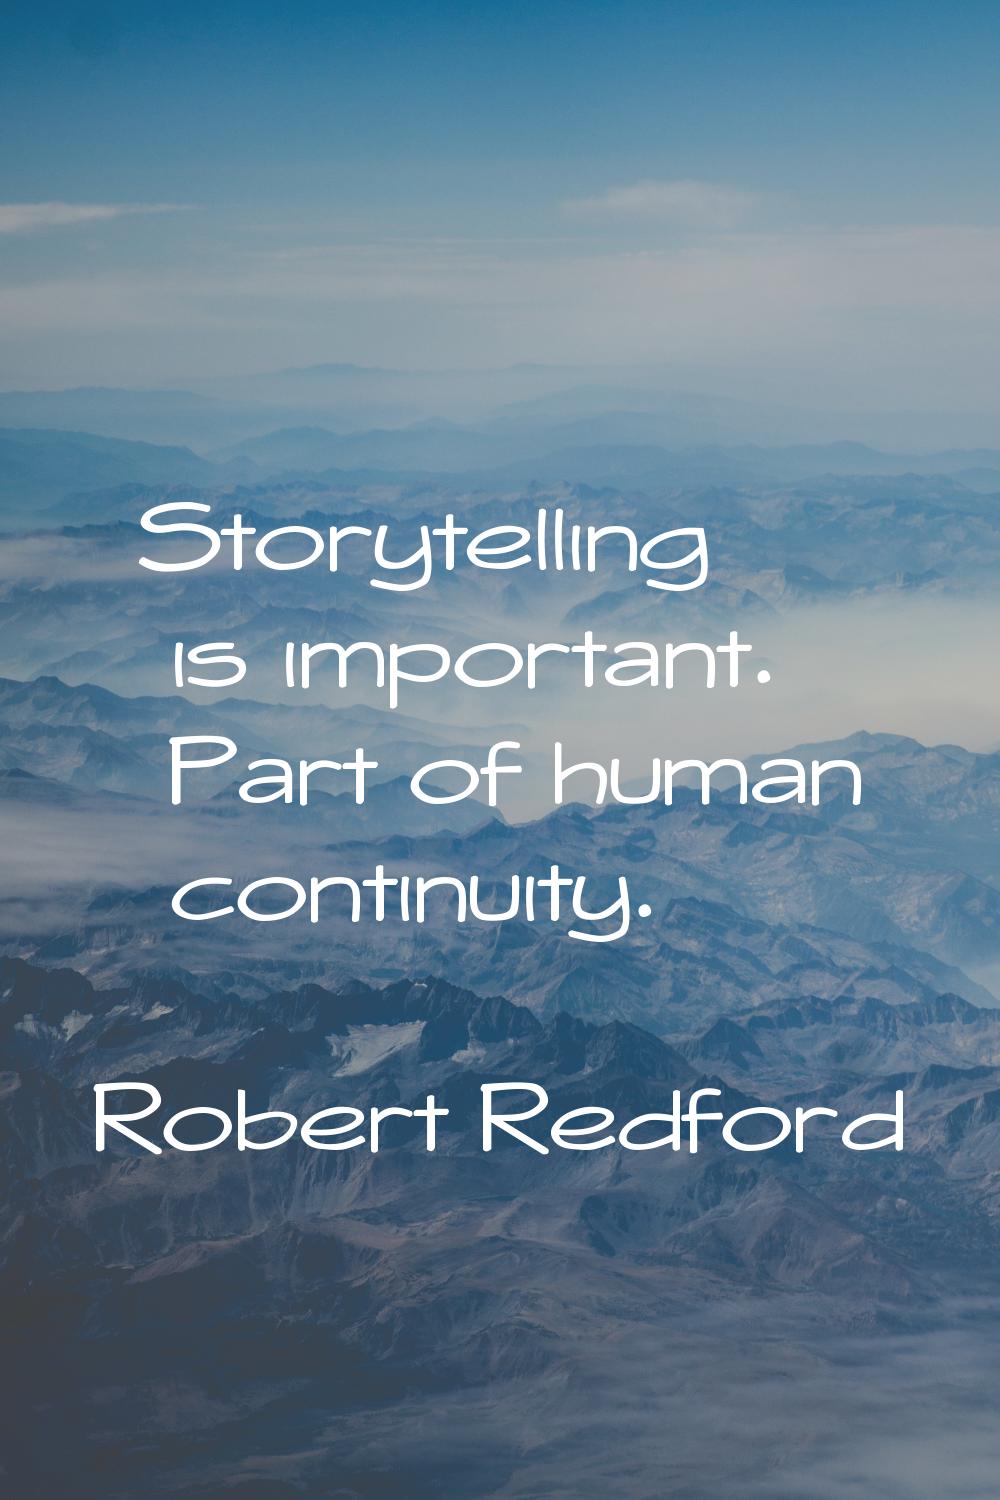 Storytelling is important. Part of human continuity.